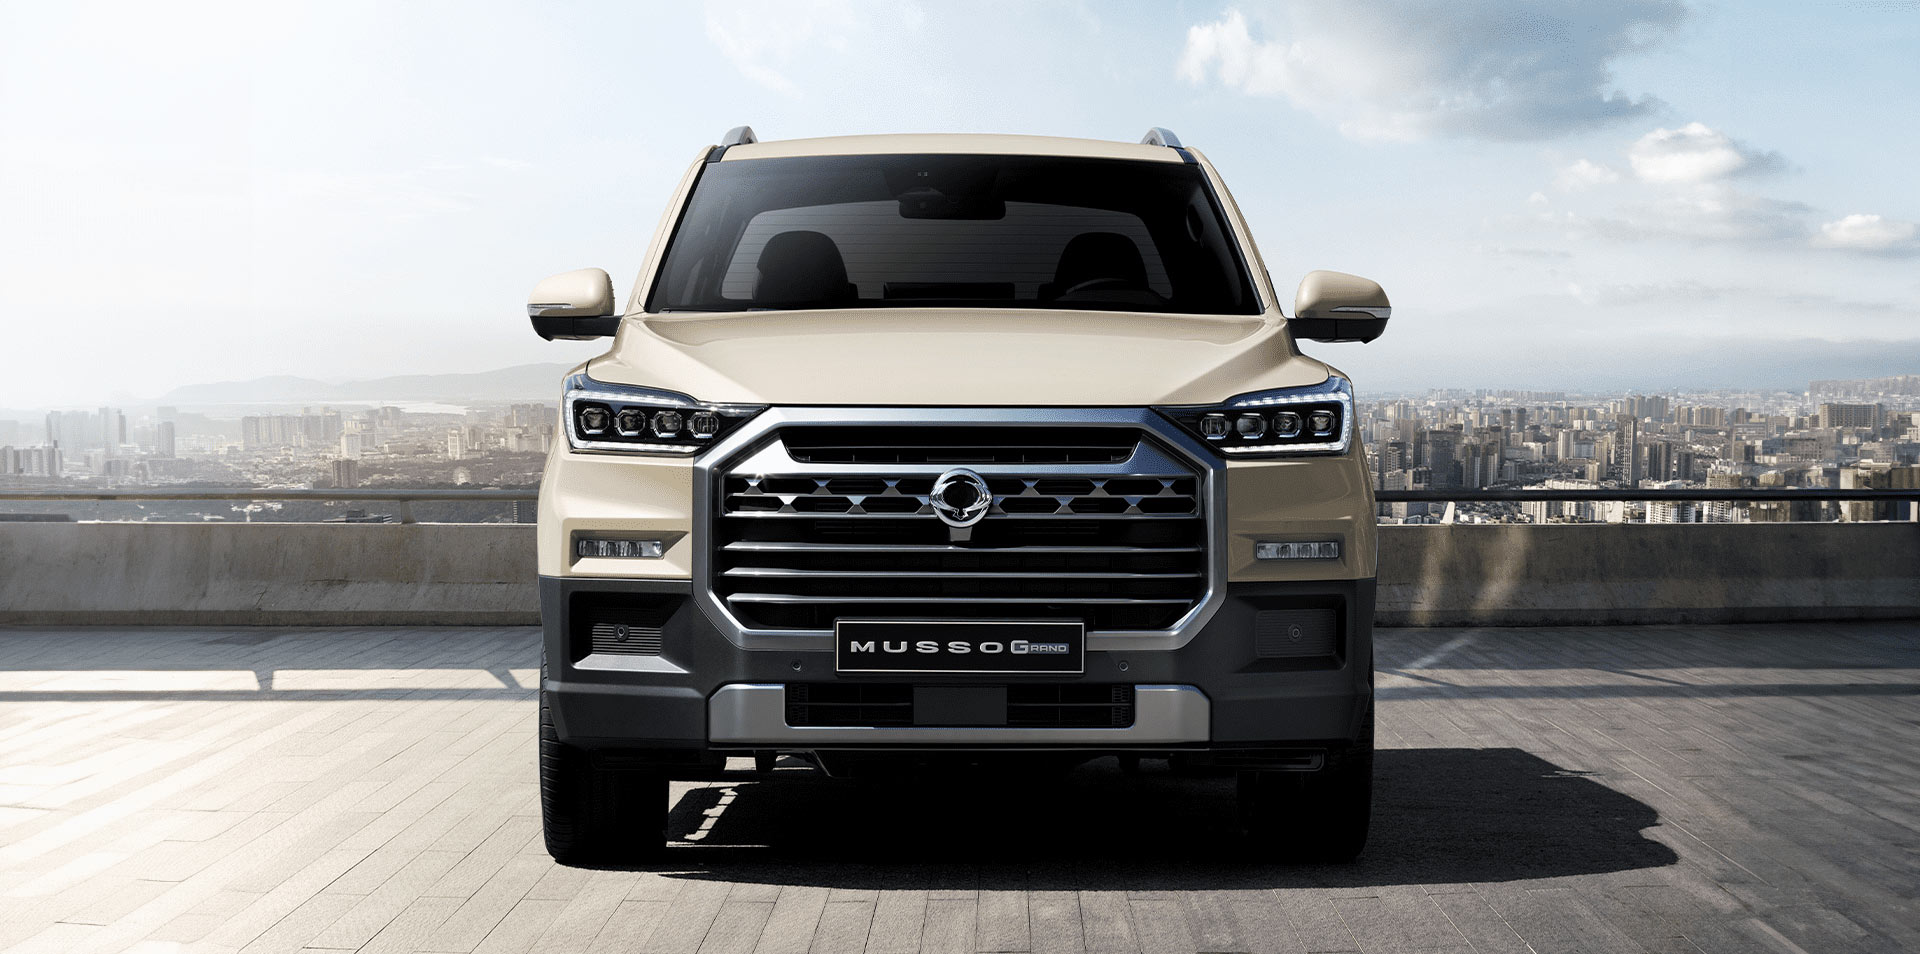 SsangYong Musso Grand poliftingowy przód grill